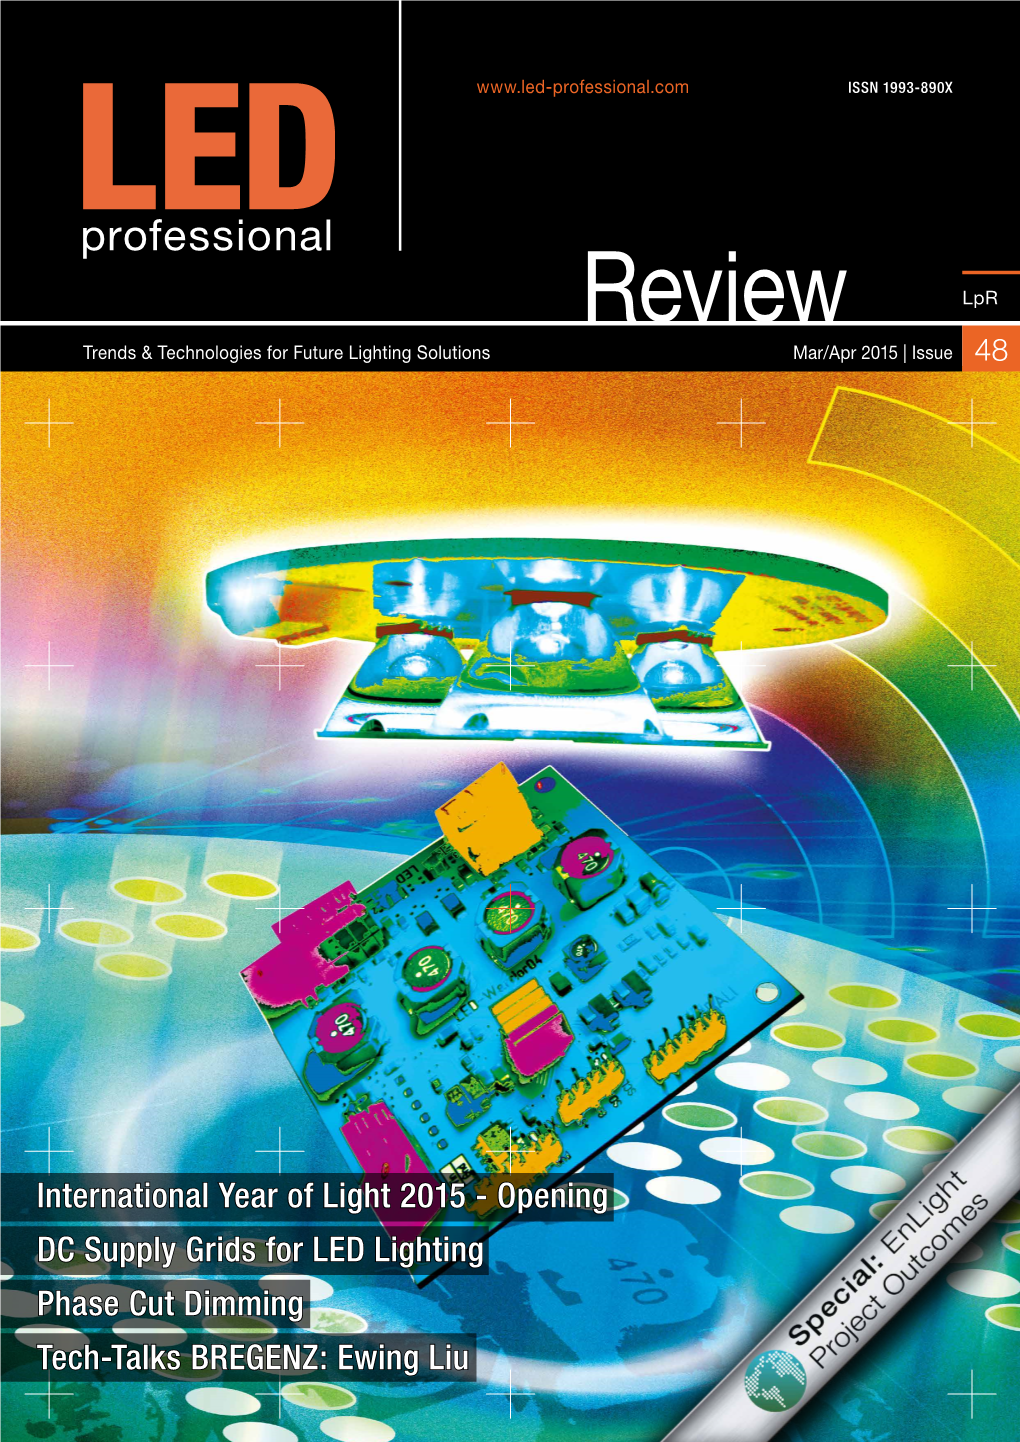 Review Lpr Trends & Technologies for Future Lighting Solutions Mar/Apr 2015 | Issue 48